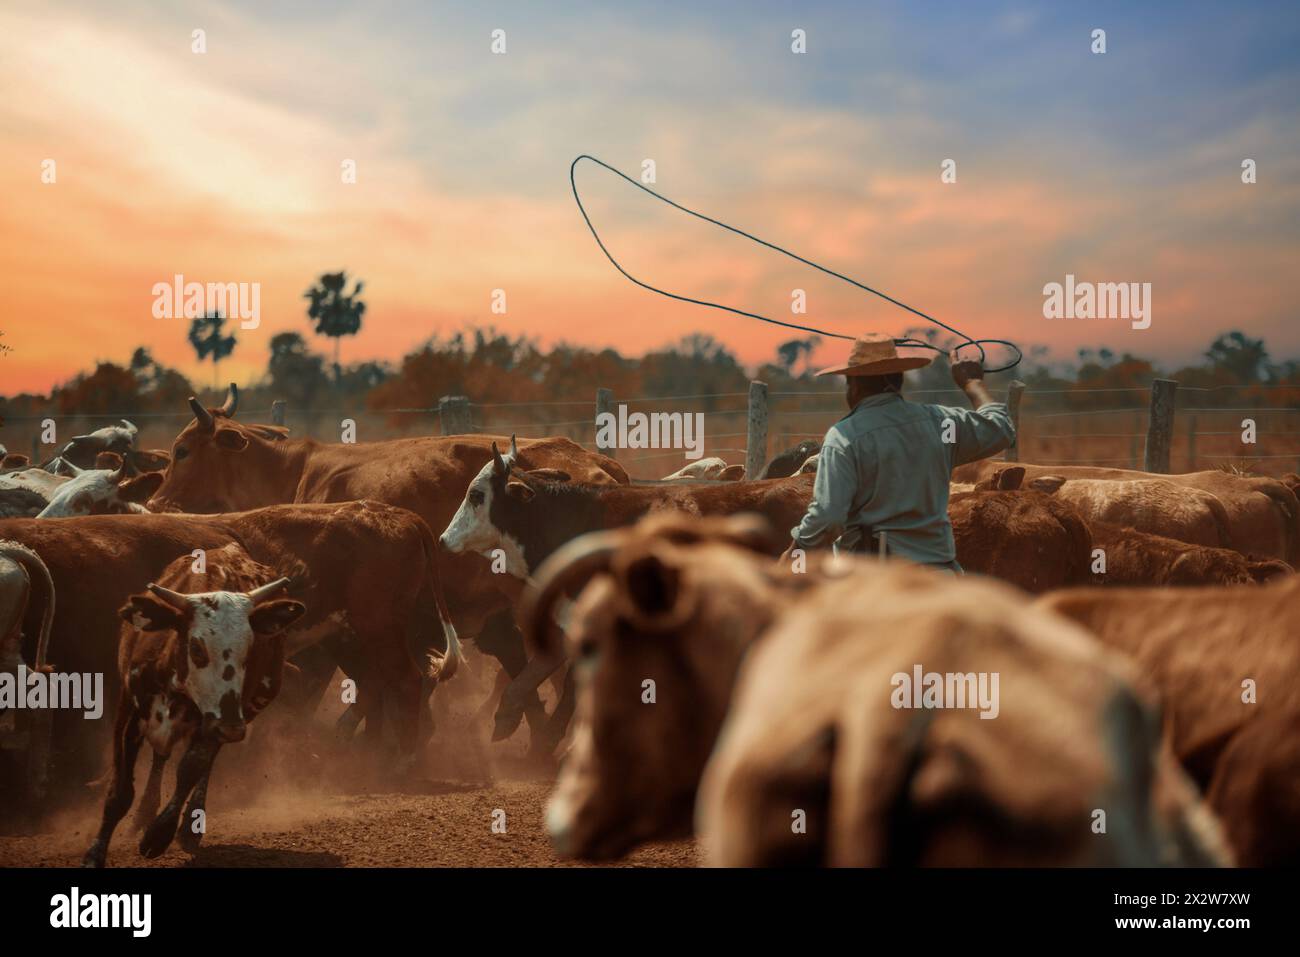 Worker on duty between the cattle in vaccination season in a ranch in Argentina. Stock Photo